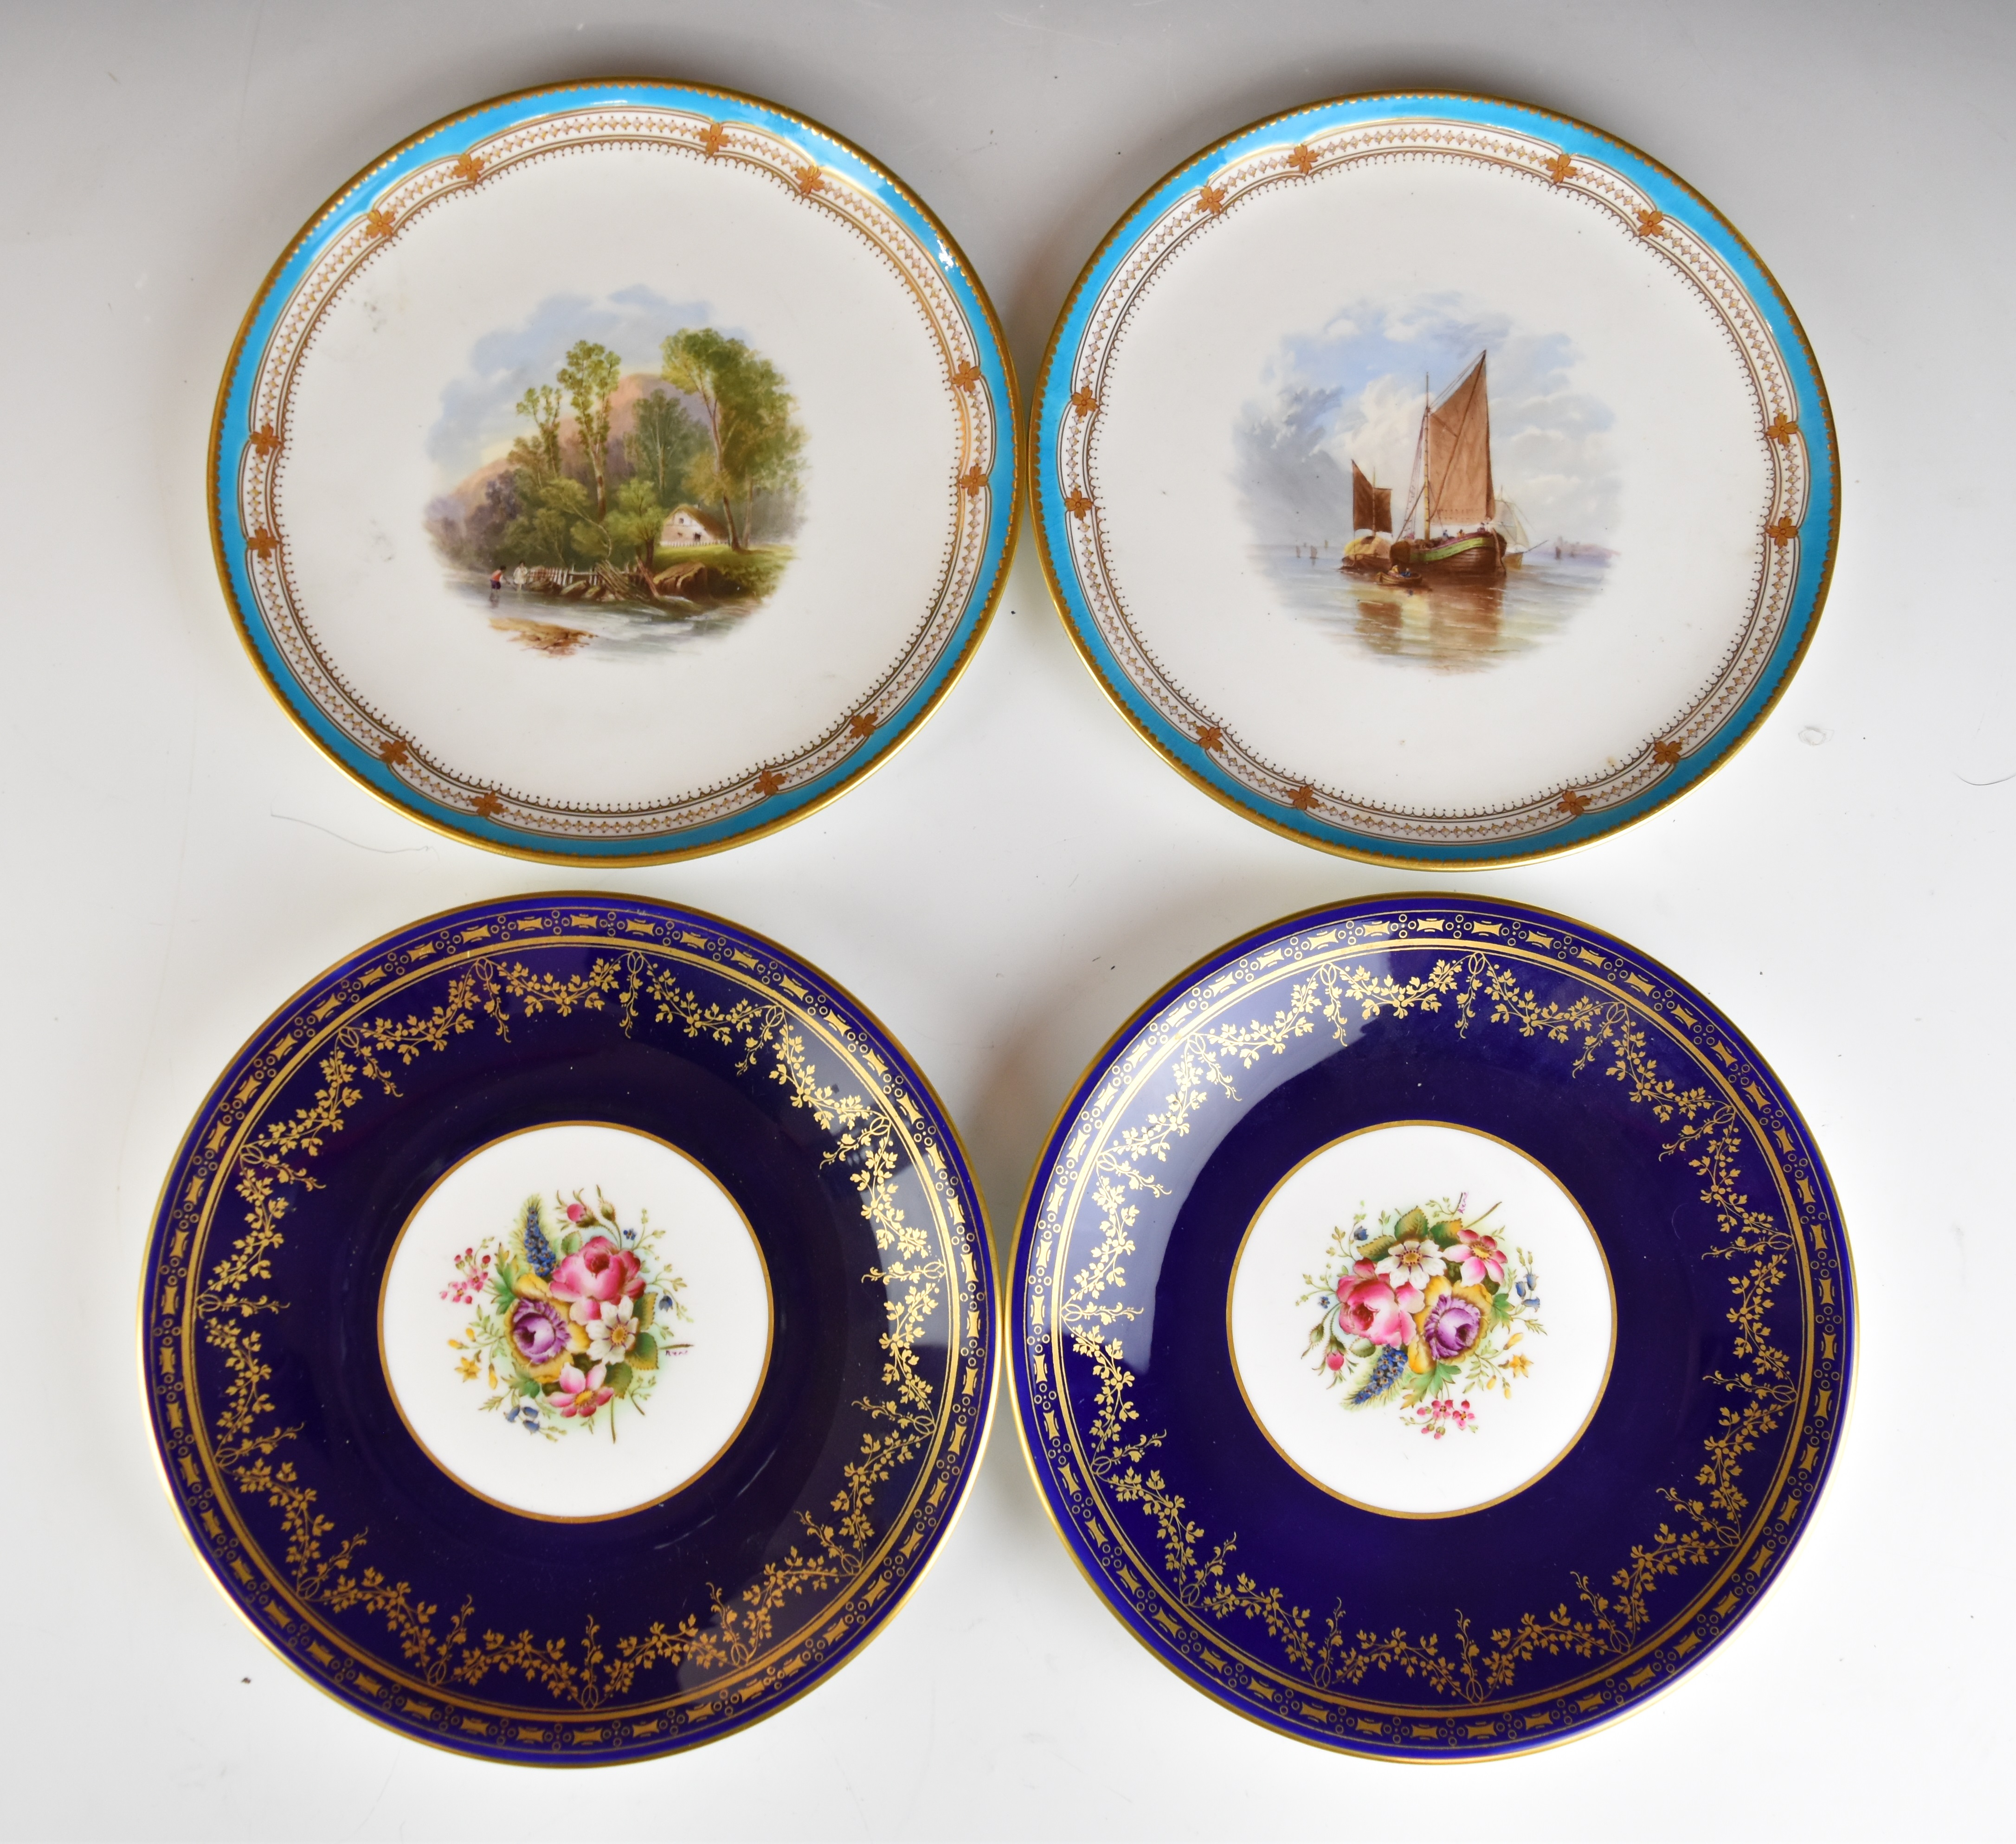 Cabinet plates including Chamberlains Worcester, Royal Worcester, Spode, several Prattware and - Image 8 of 8